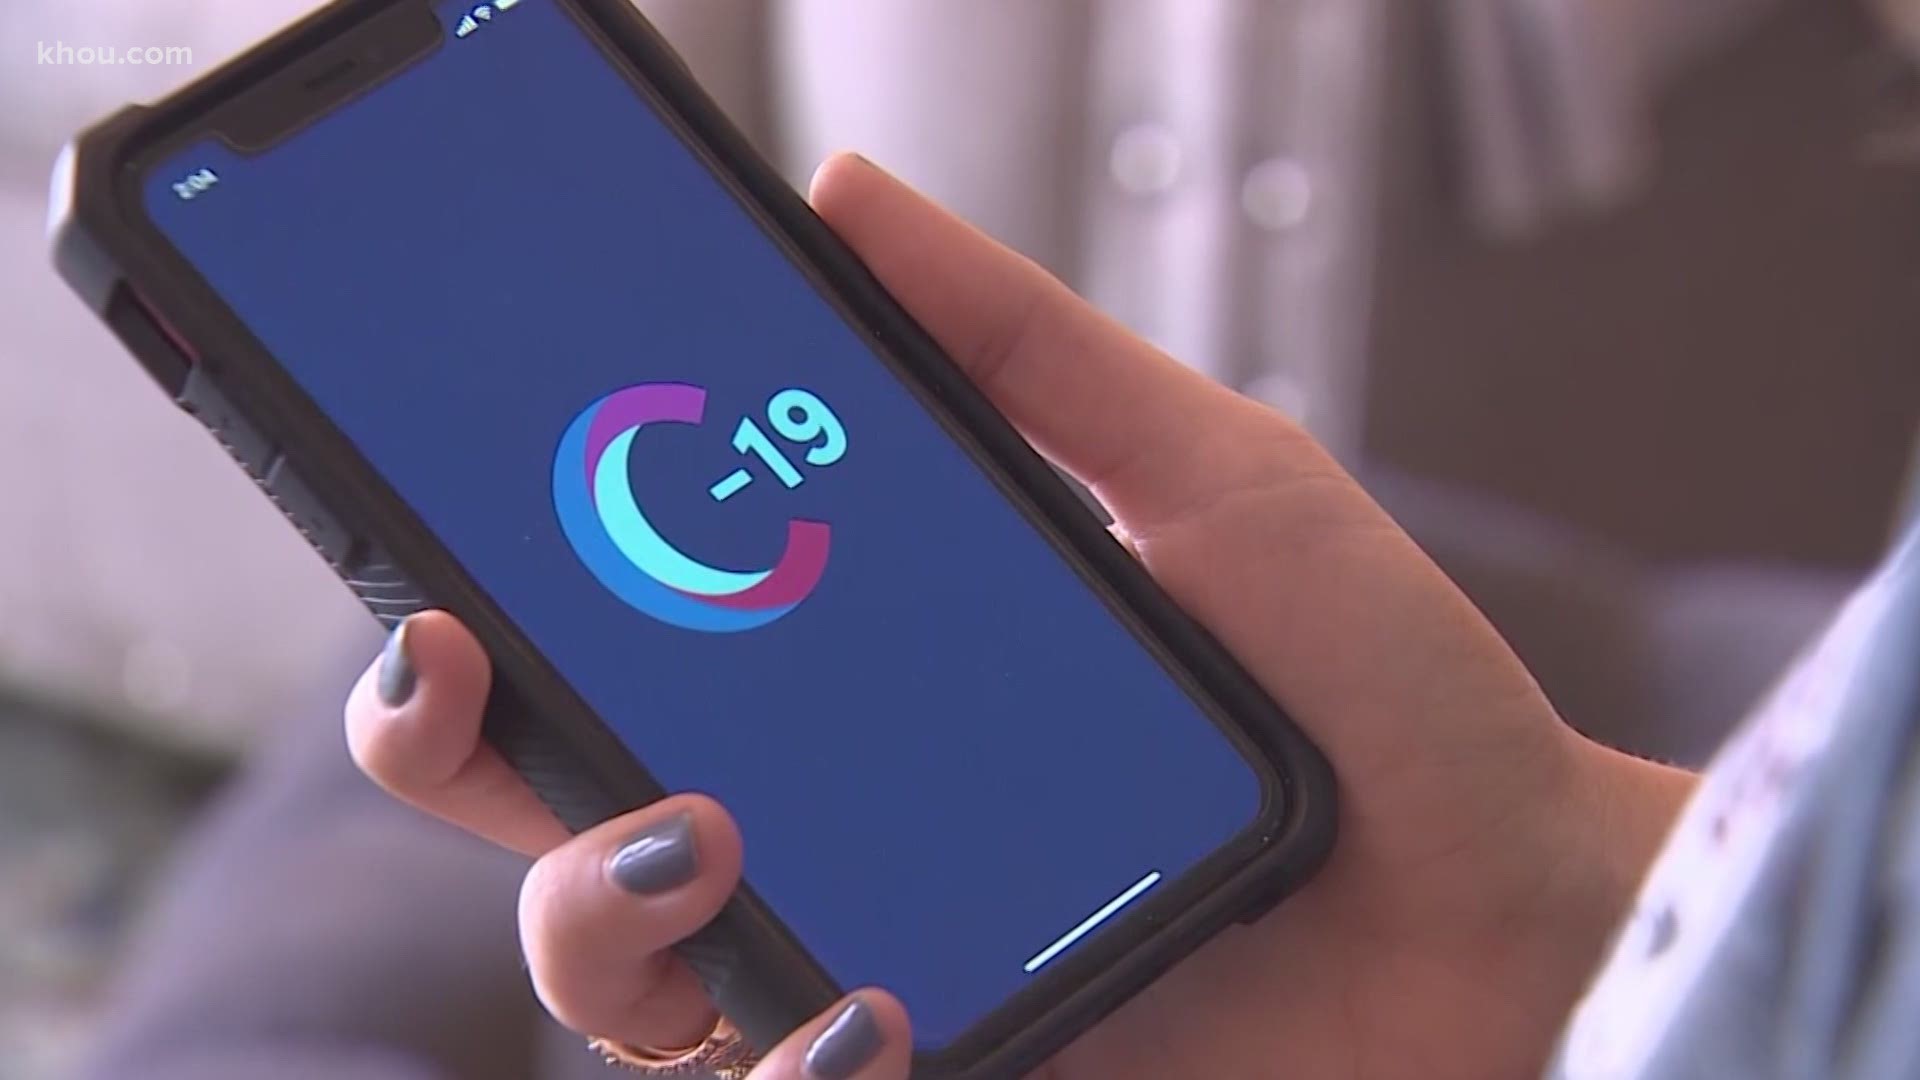 A new free app aims to record users’ COVID-19 symptoms so scientists can learn more about the new virus, understand how it’s spreading and determine hotspots.